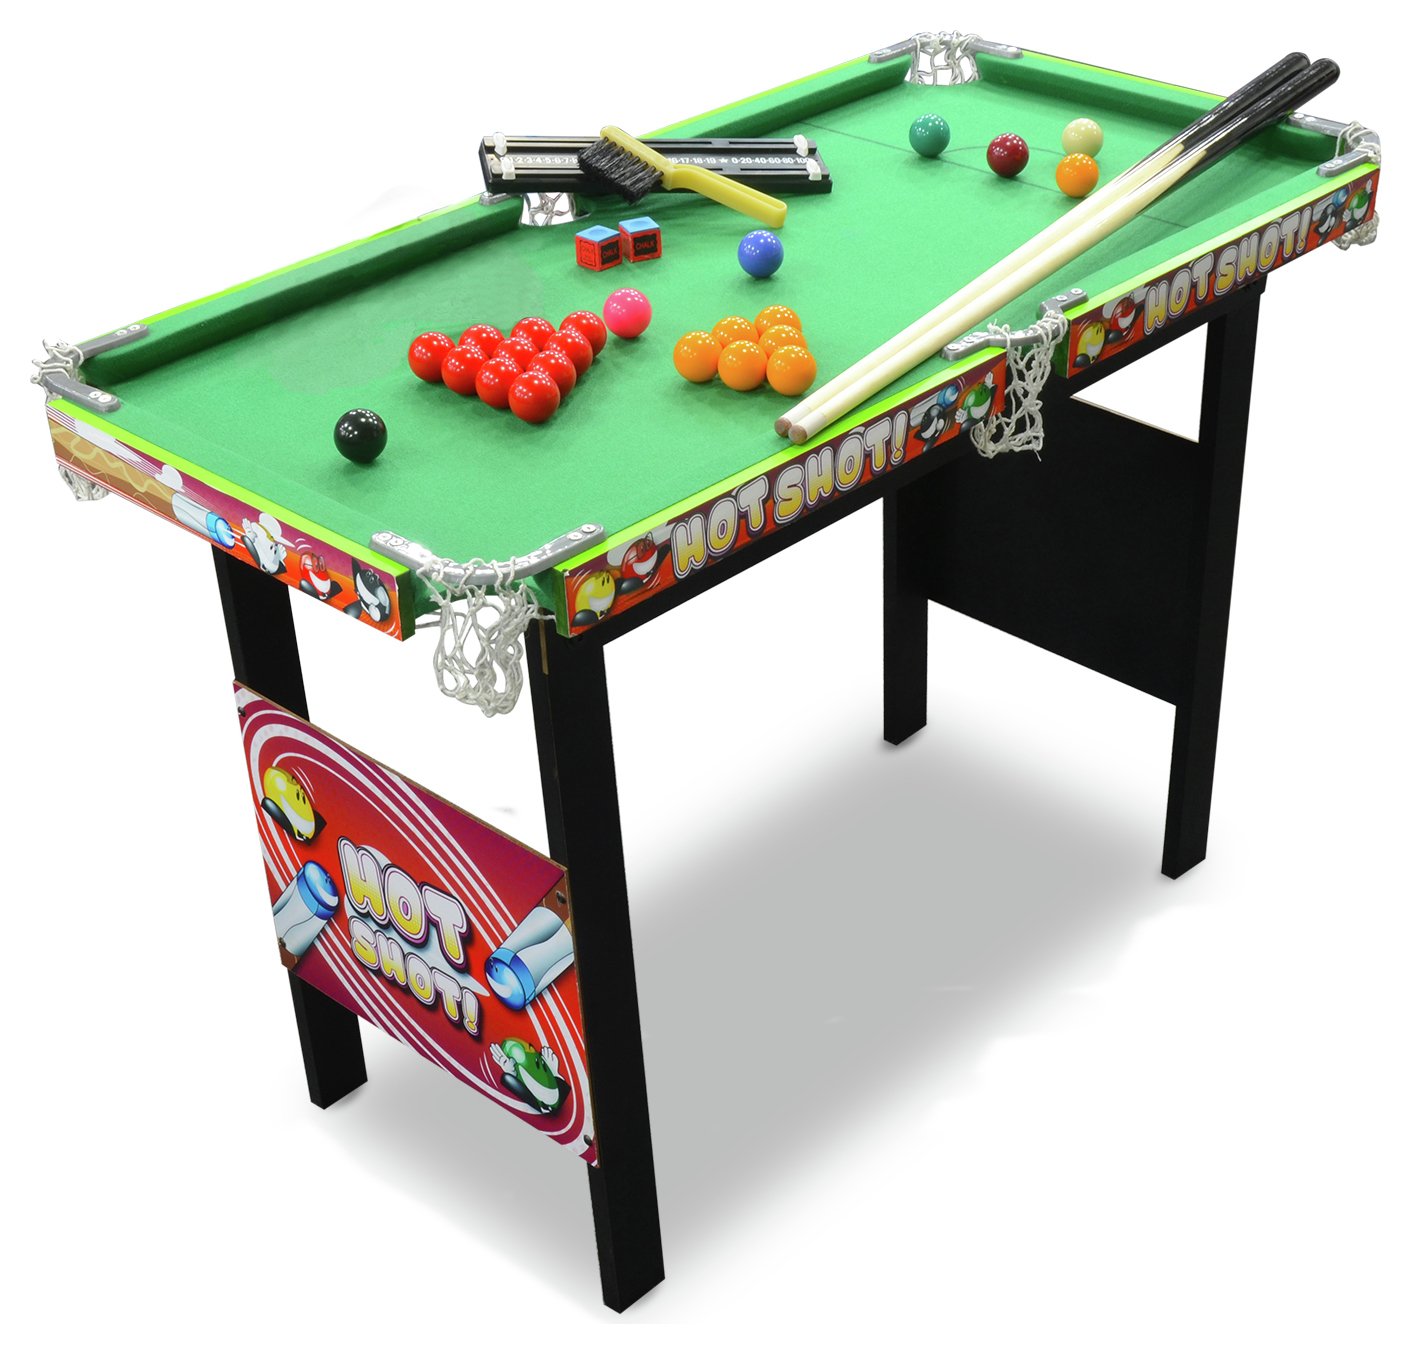 Chad Valley 3ft Snooker/Pool Game Table. Review